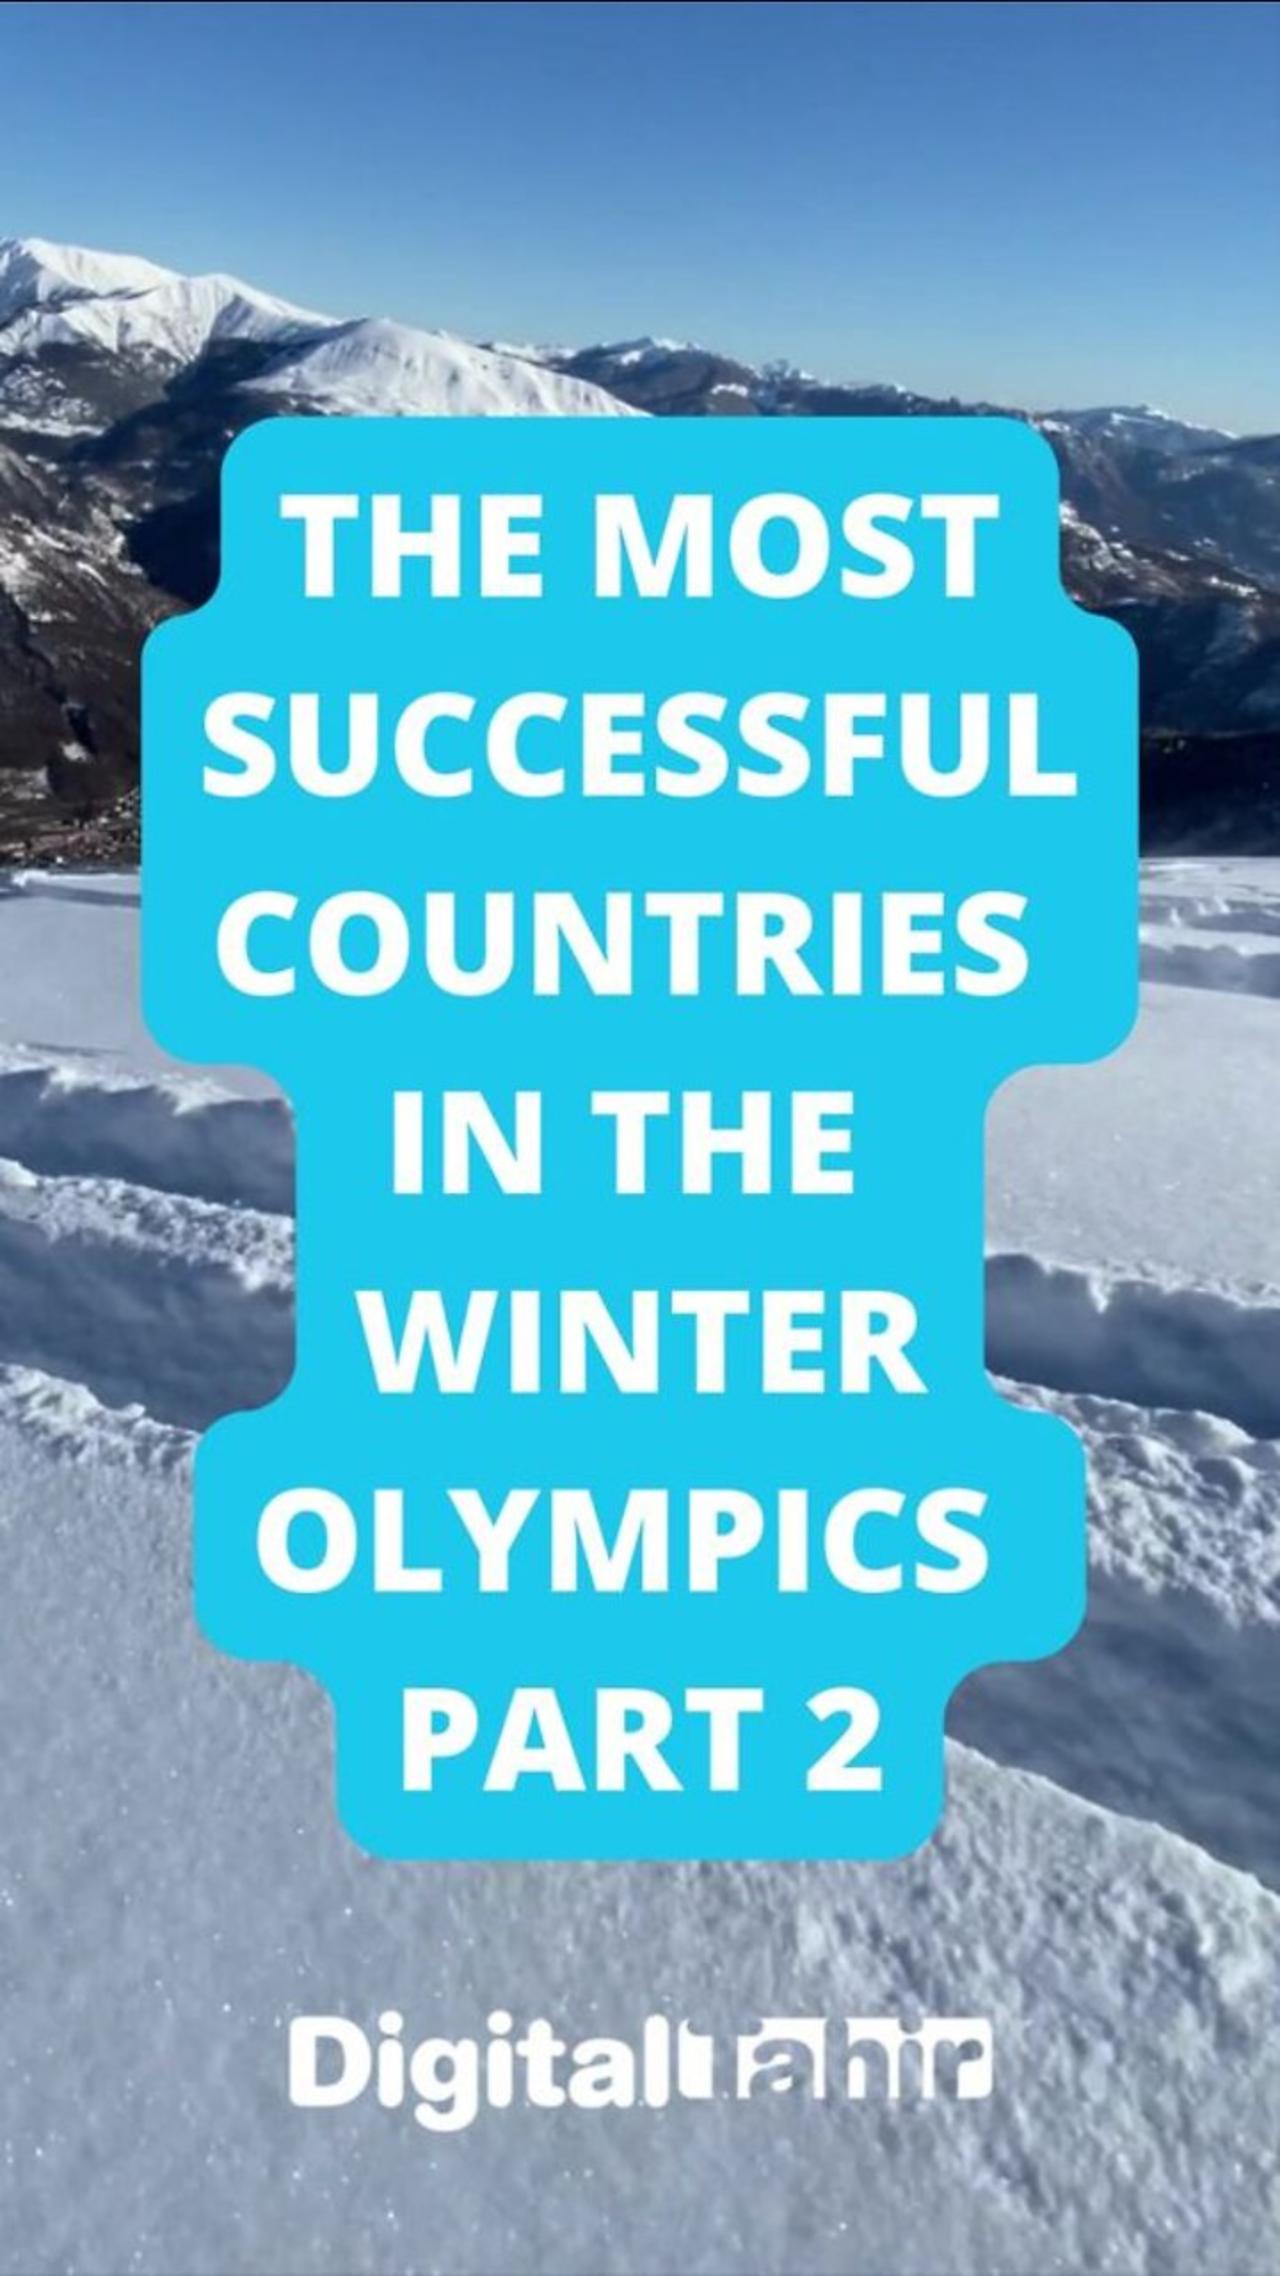 The Most Successful Countries in the Winter Olympics PART 1